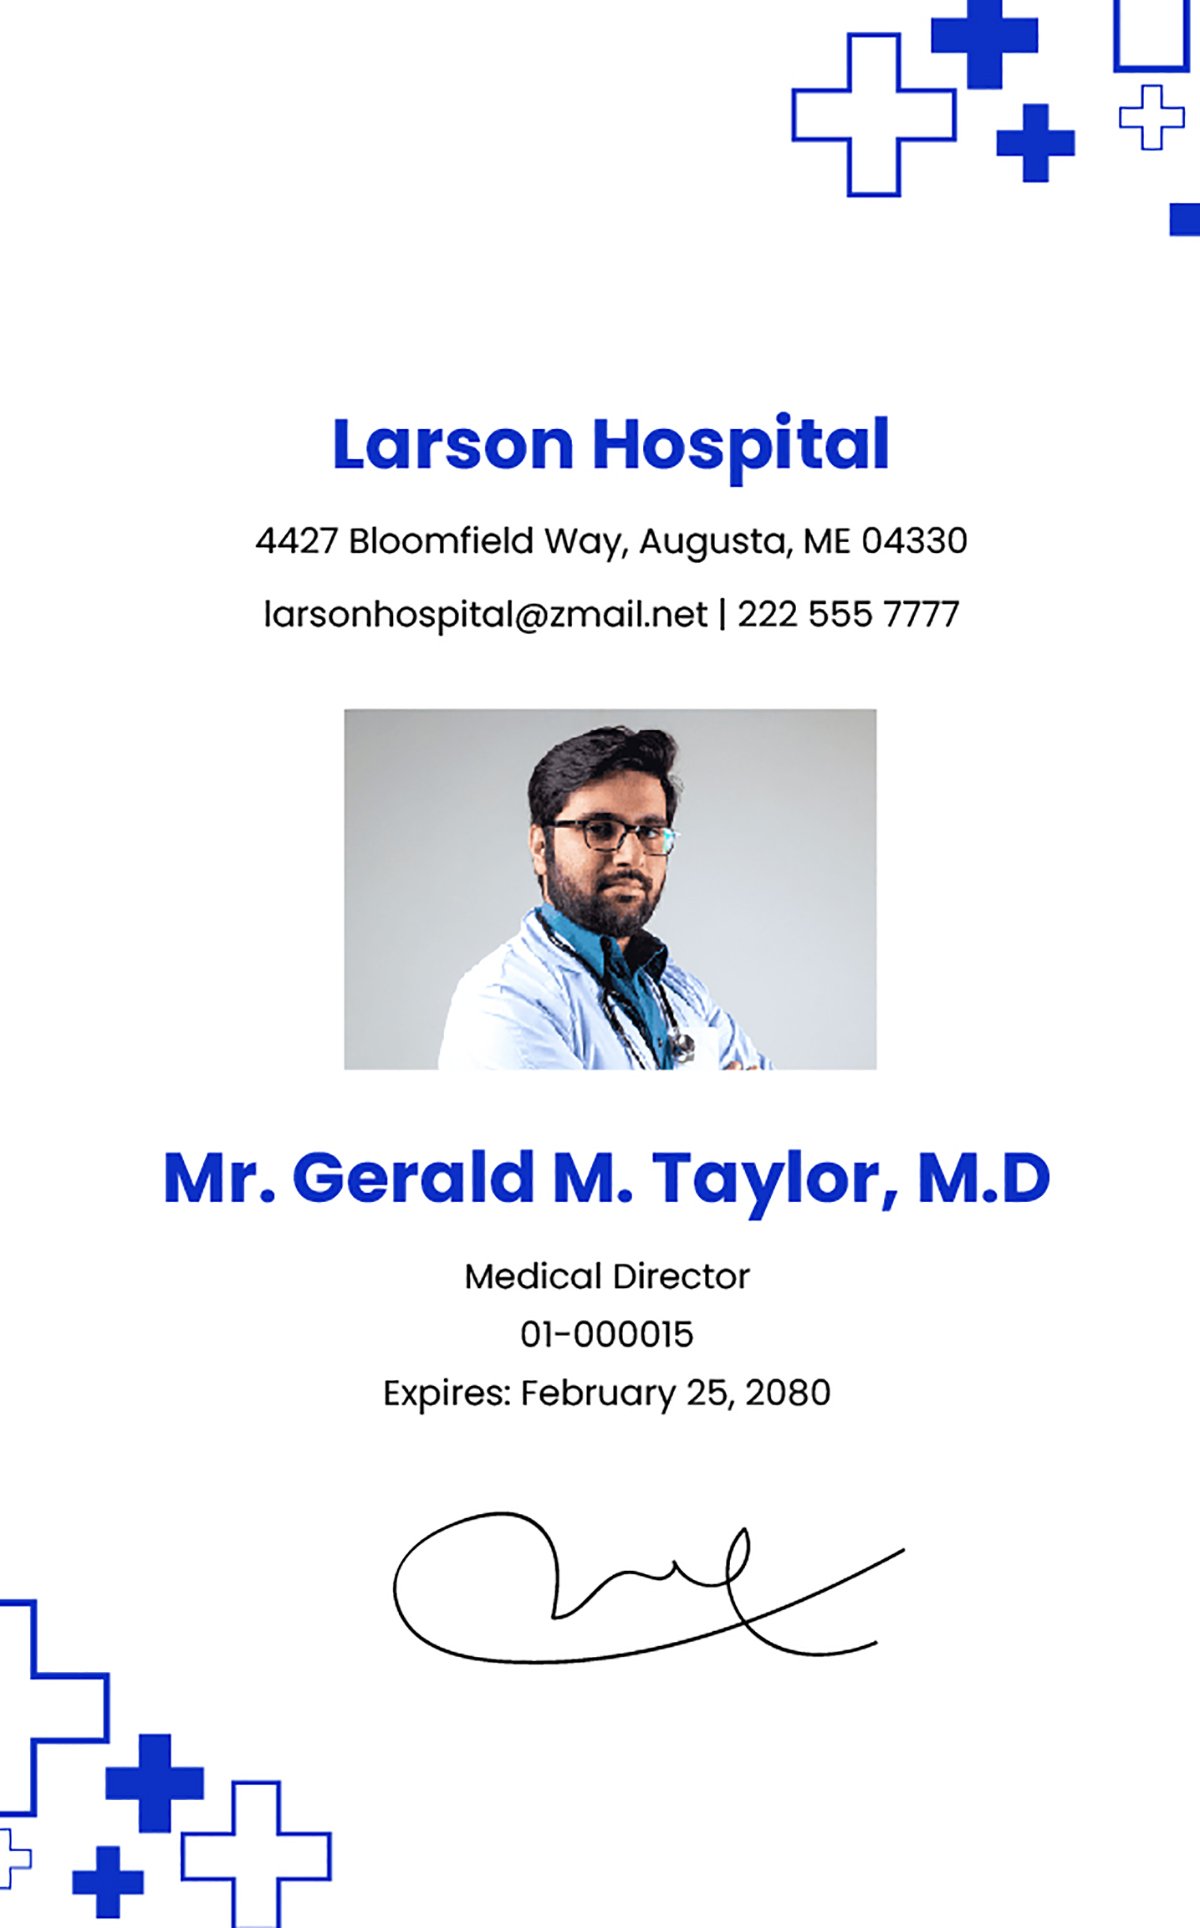 Medical Doctor ID Card Template Download in Word, Illustrator, PSD